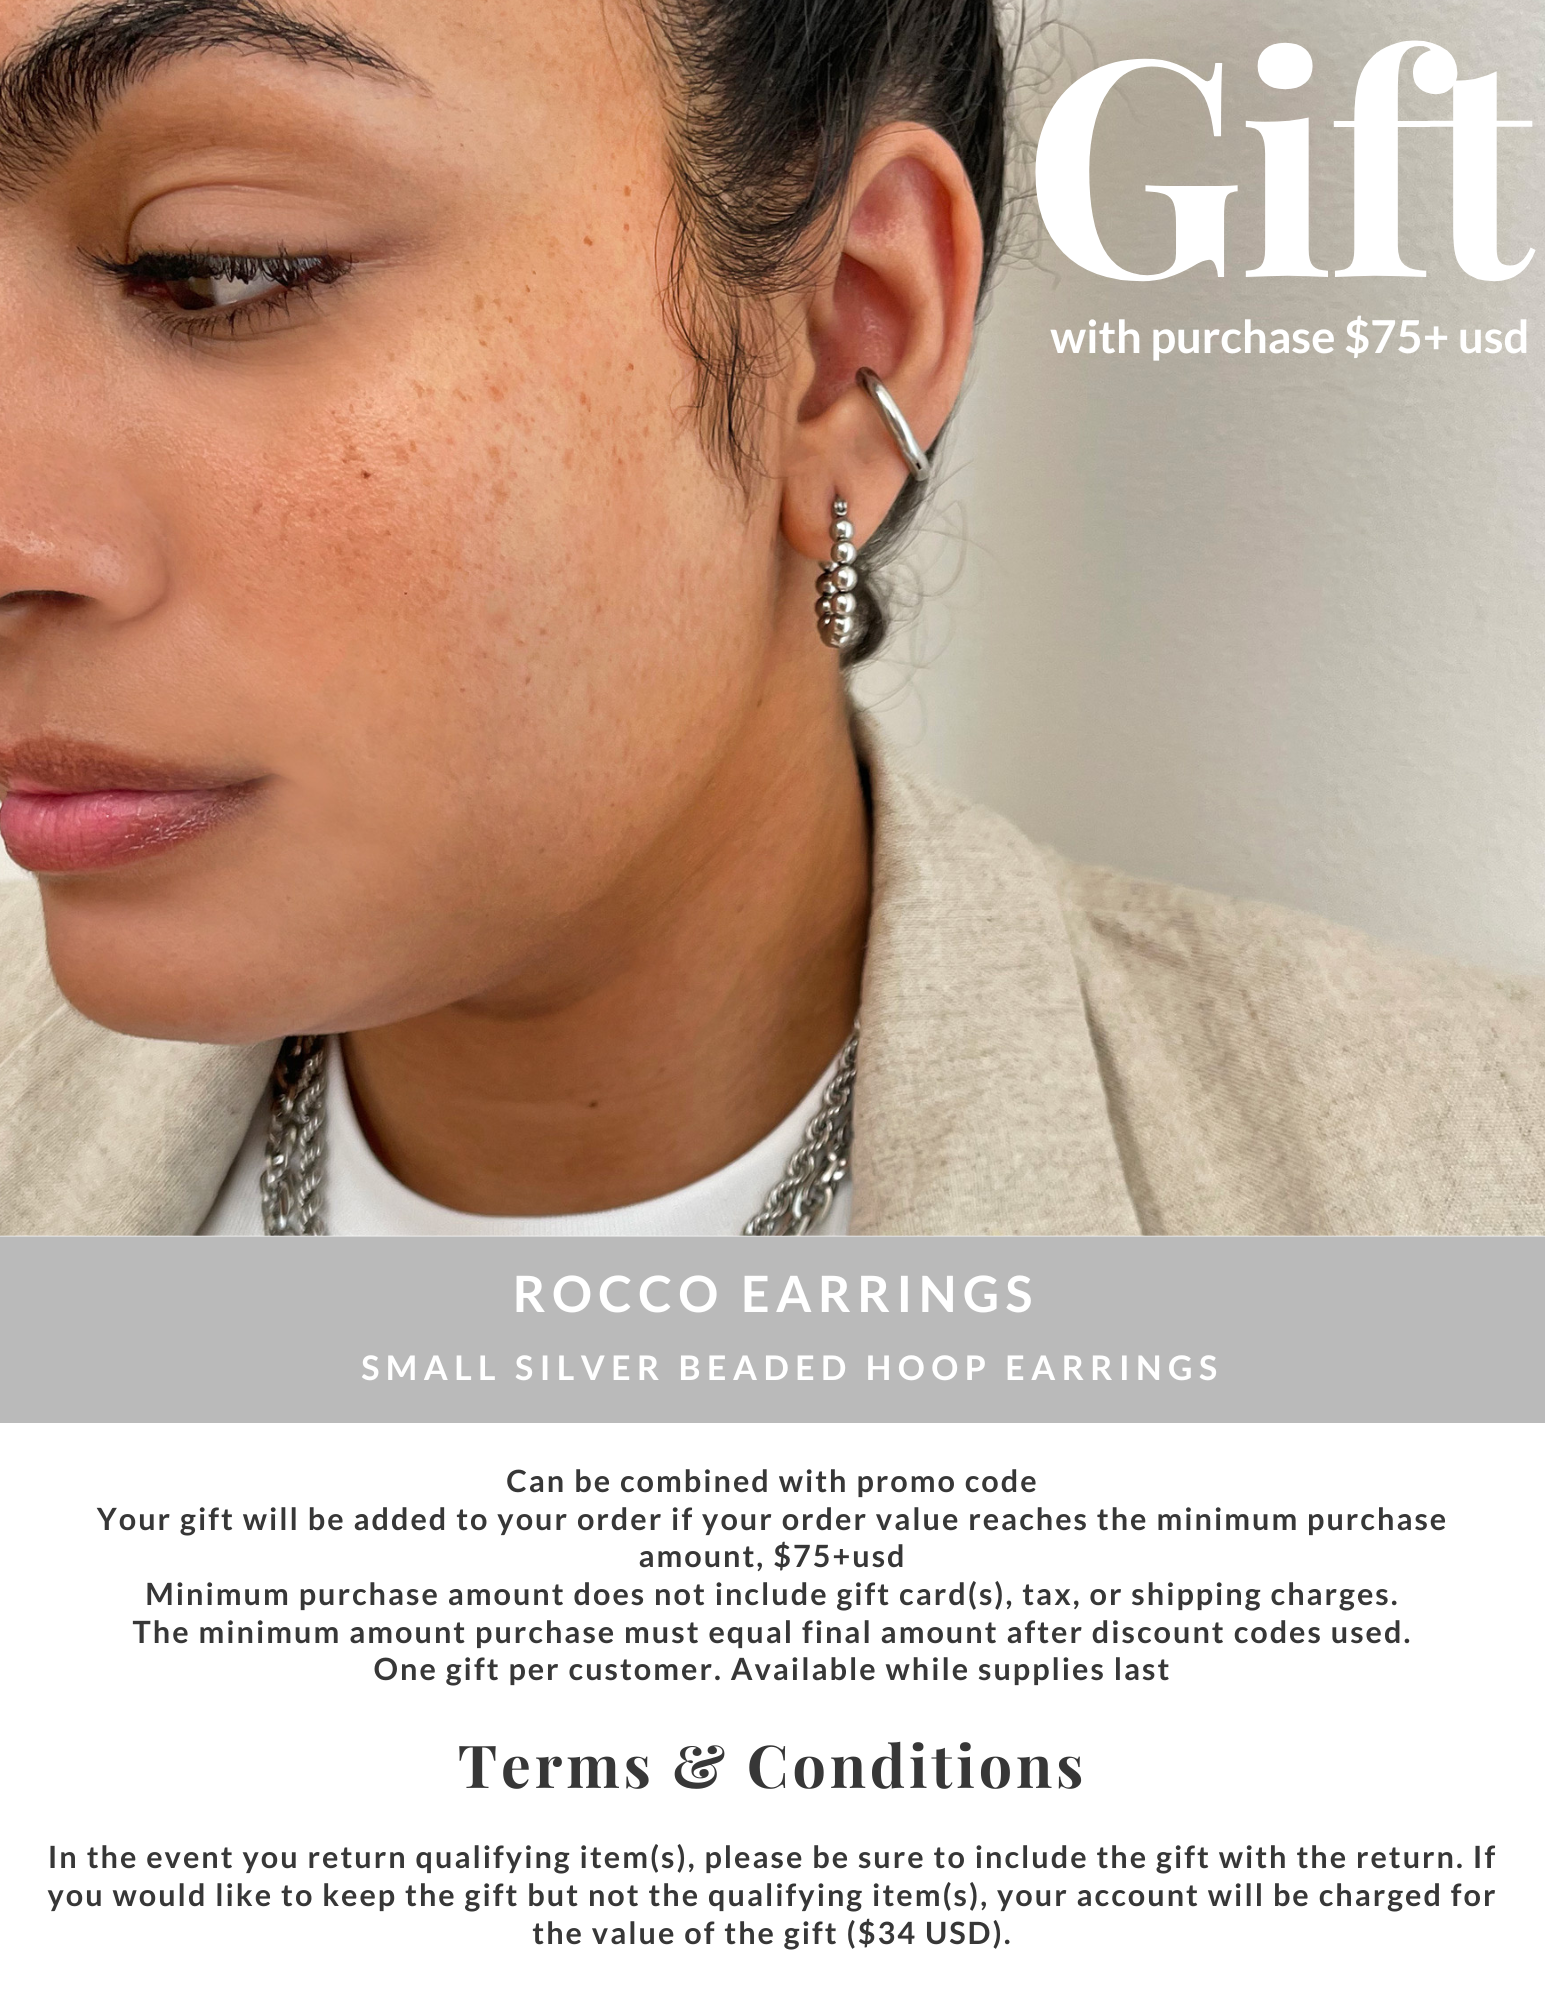 free gift with purchase over $75 Rocco small silver beaded hoop earrings silver waterproof jewelry